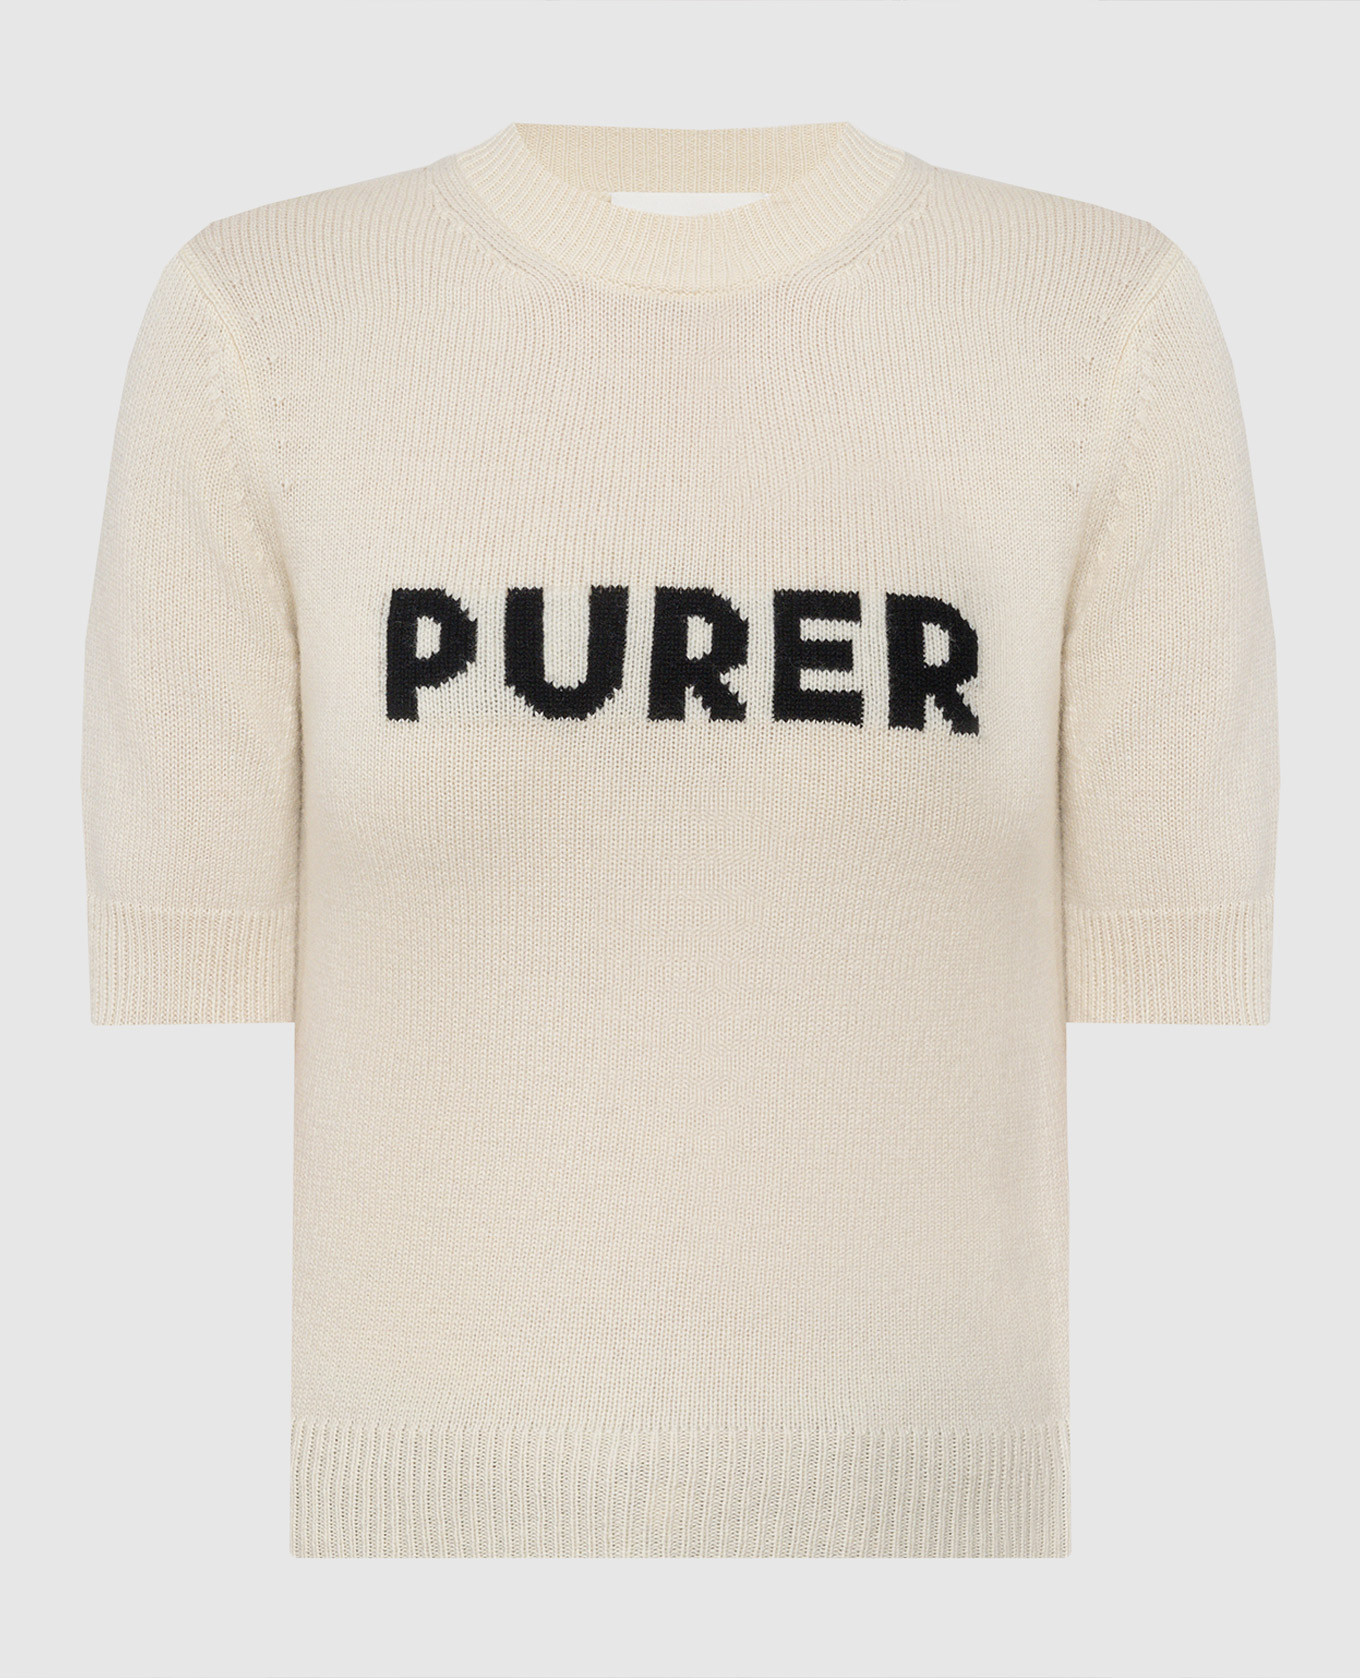 UNISONO beige t-shirt made of wool and cashmere with a pattern